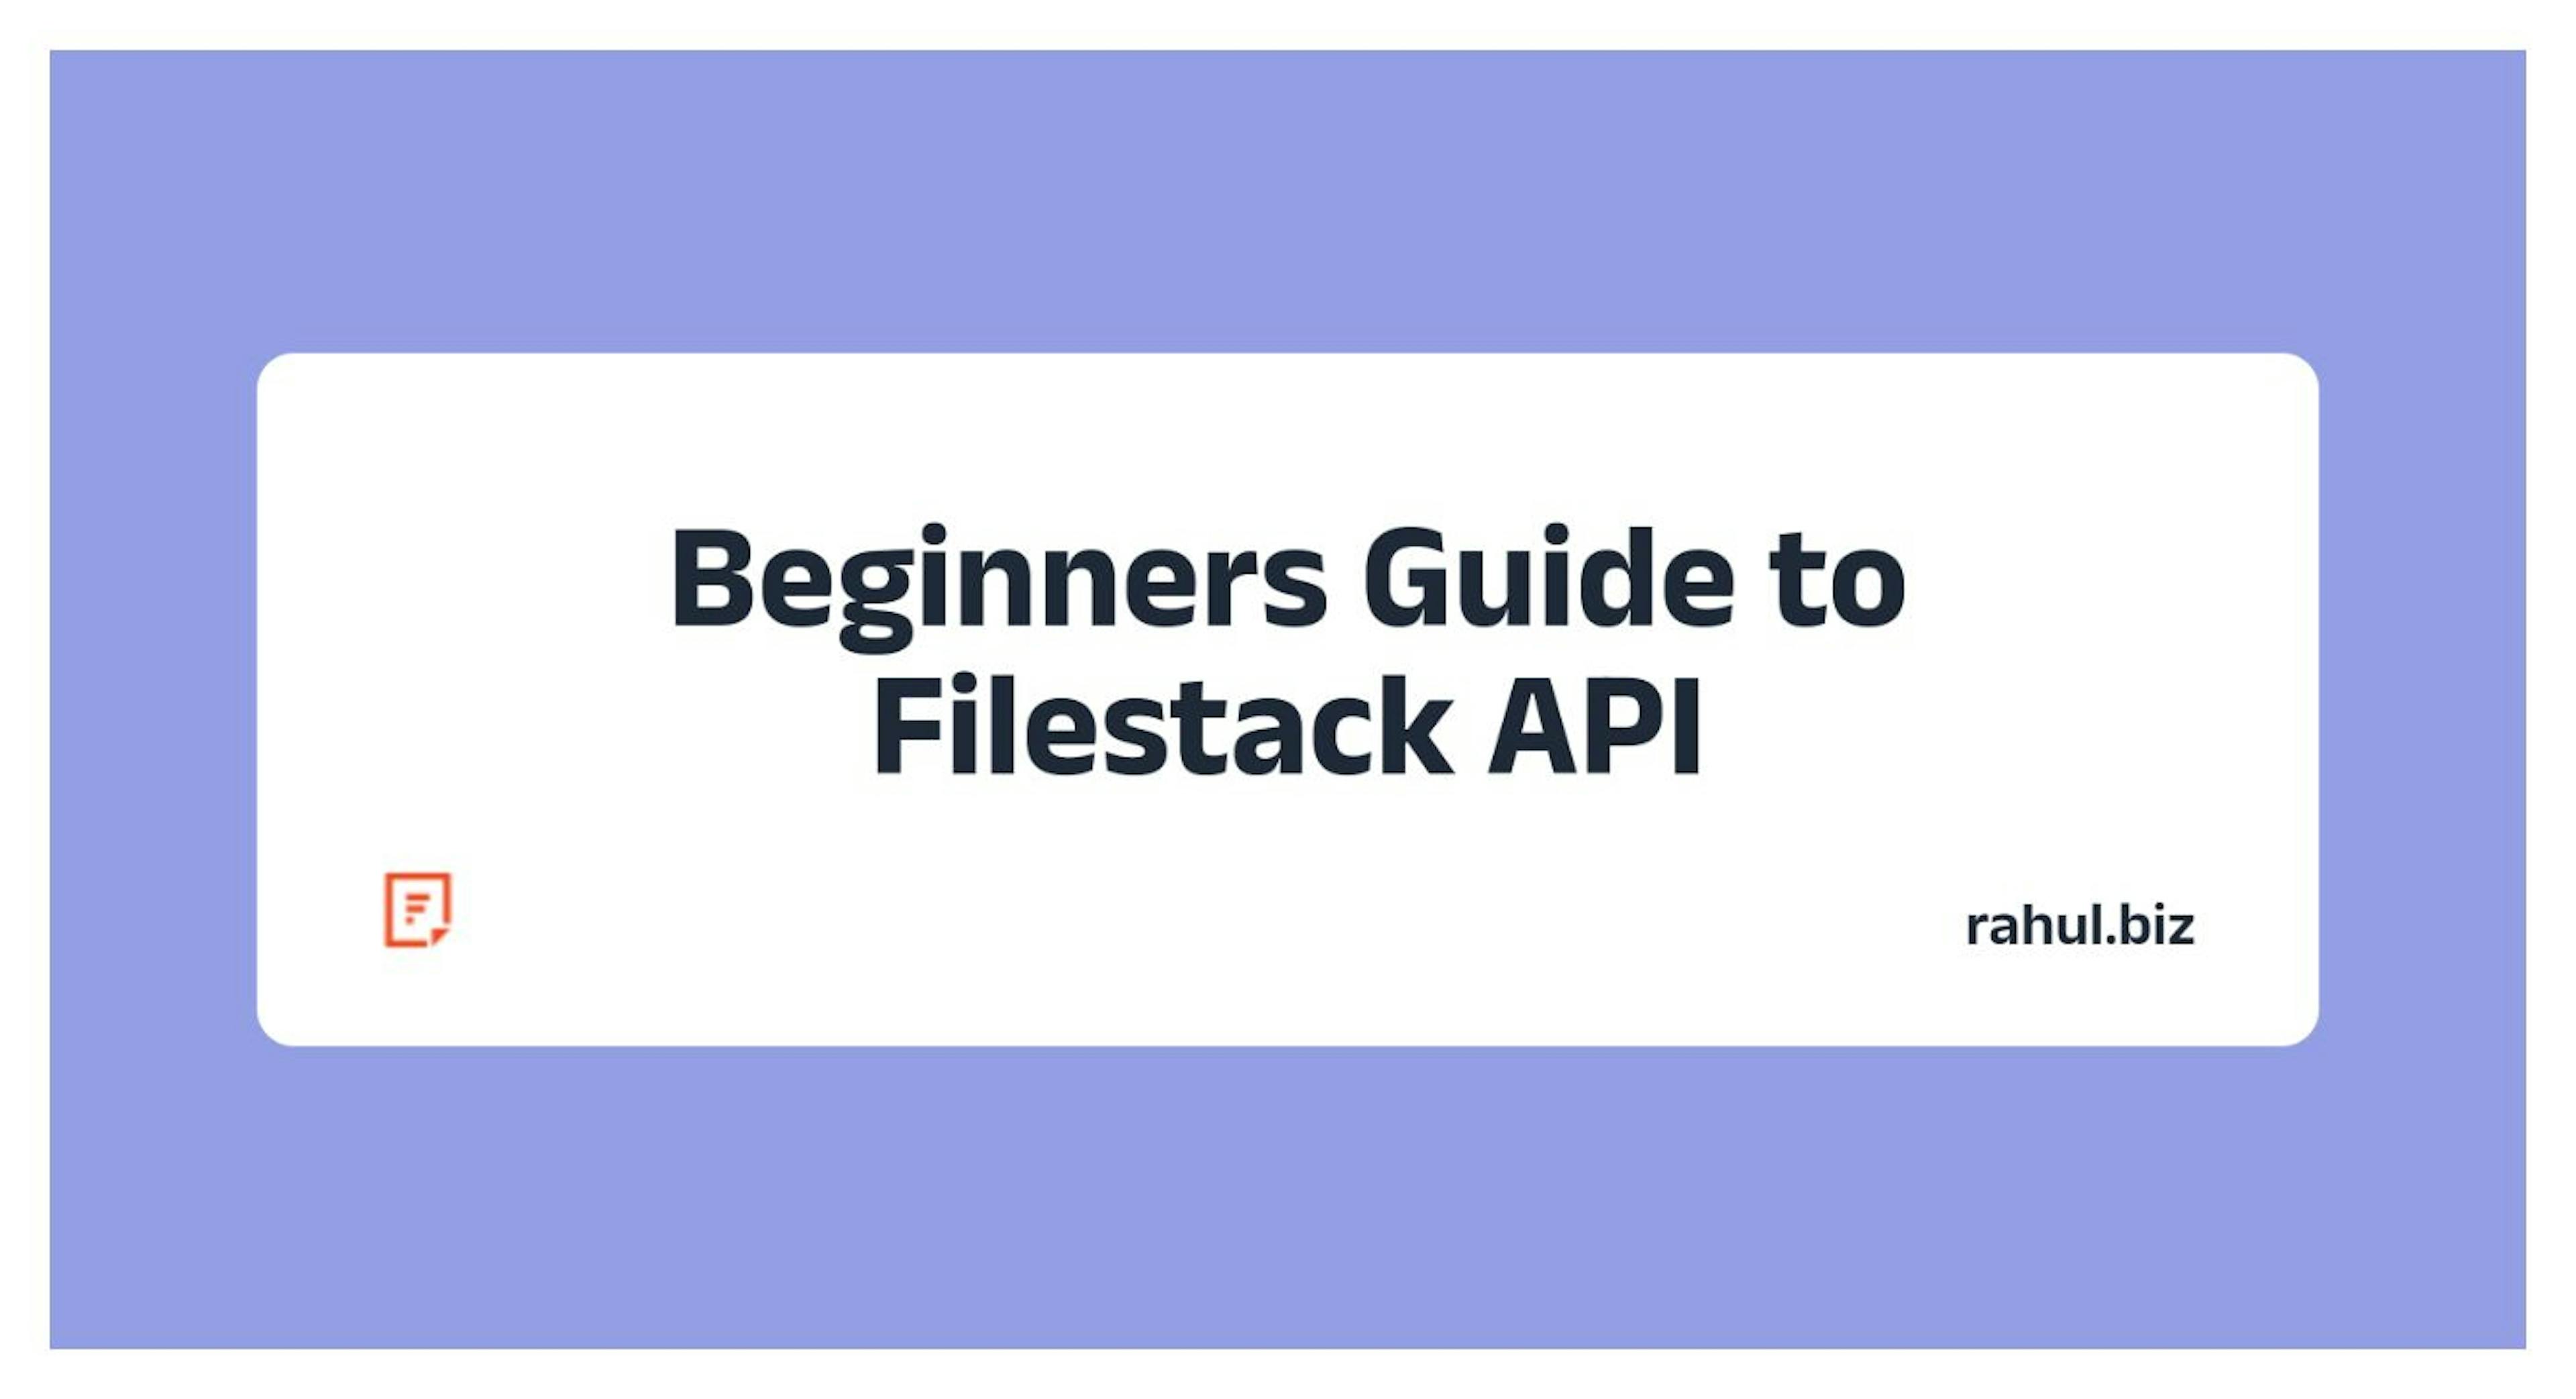 /filestack-api-everything-you-need-to-know feature image